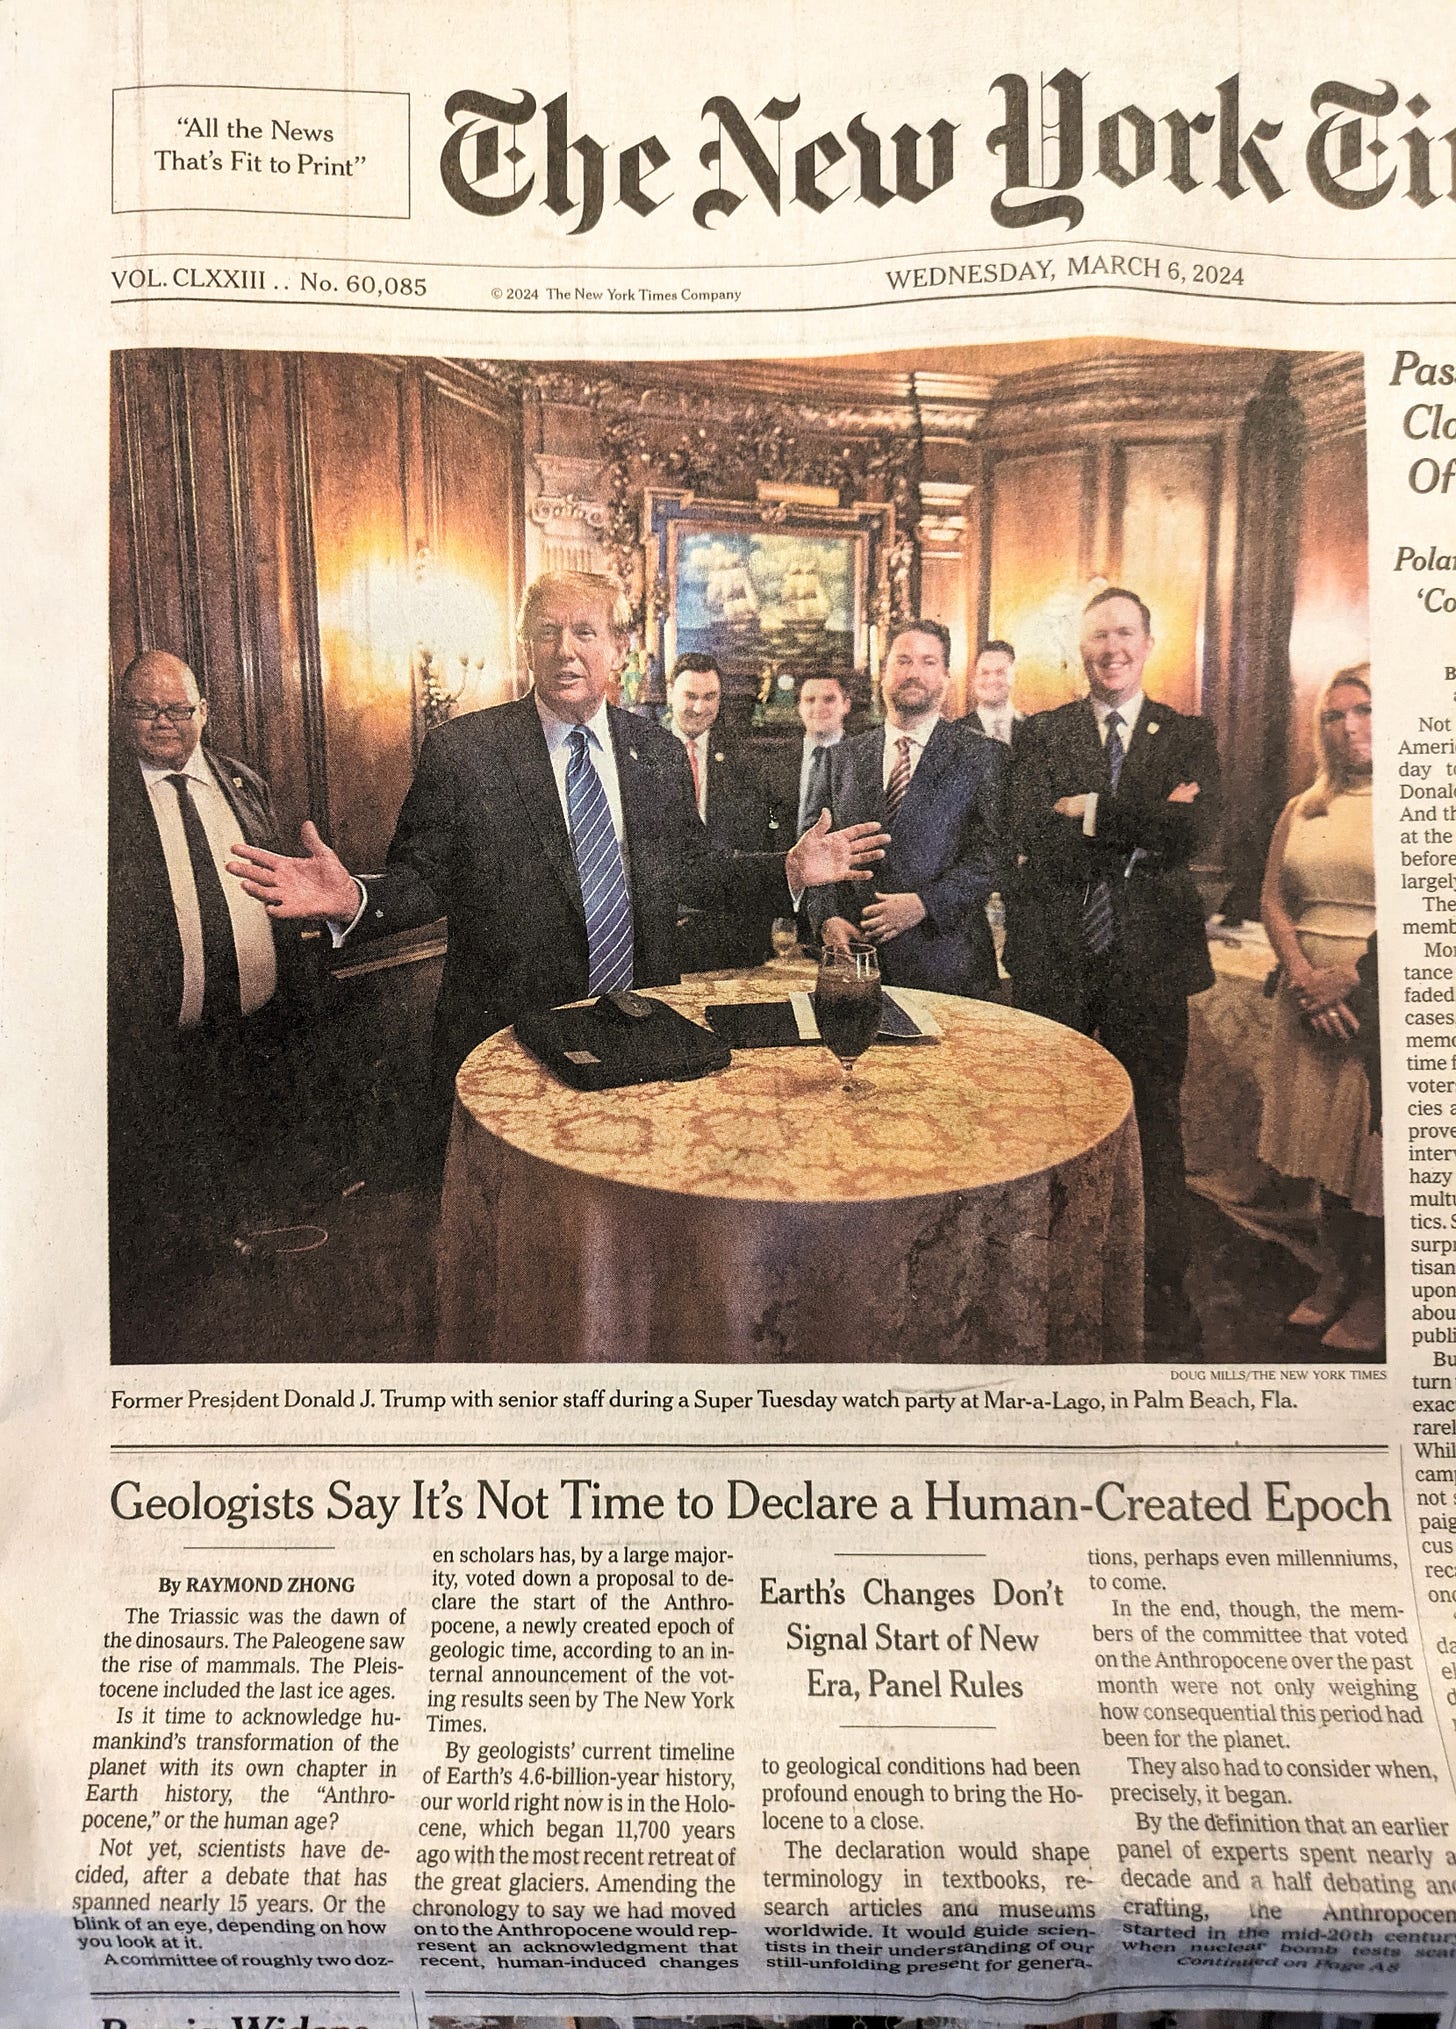 Trump and Anthropocene story on NYT front page